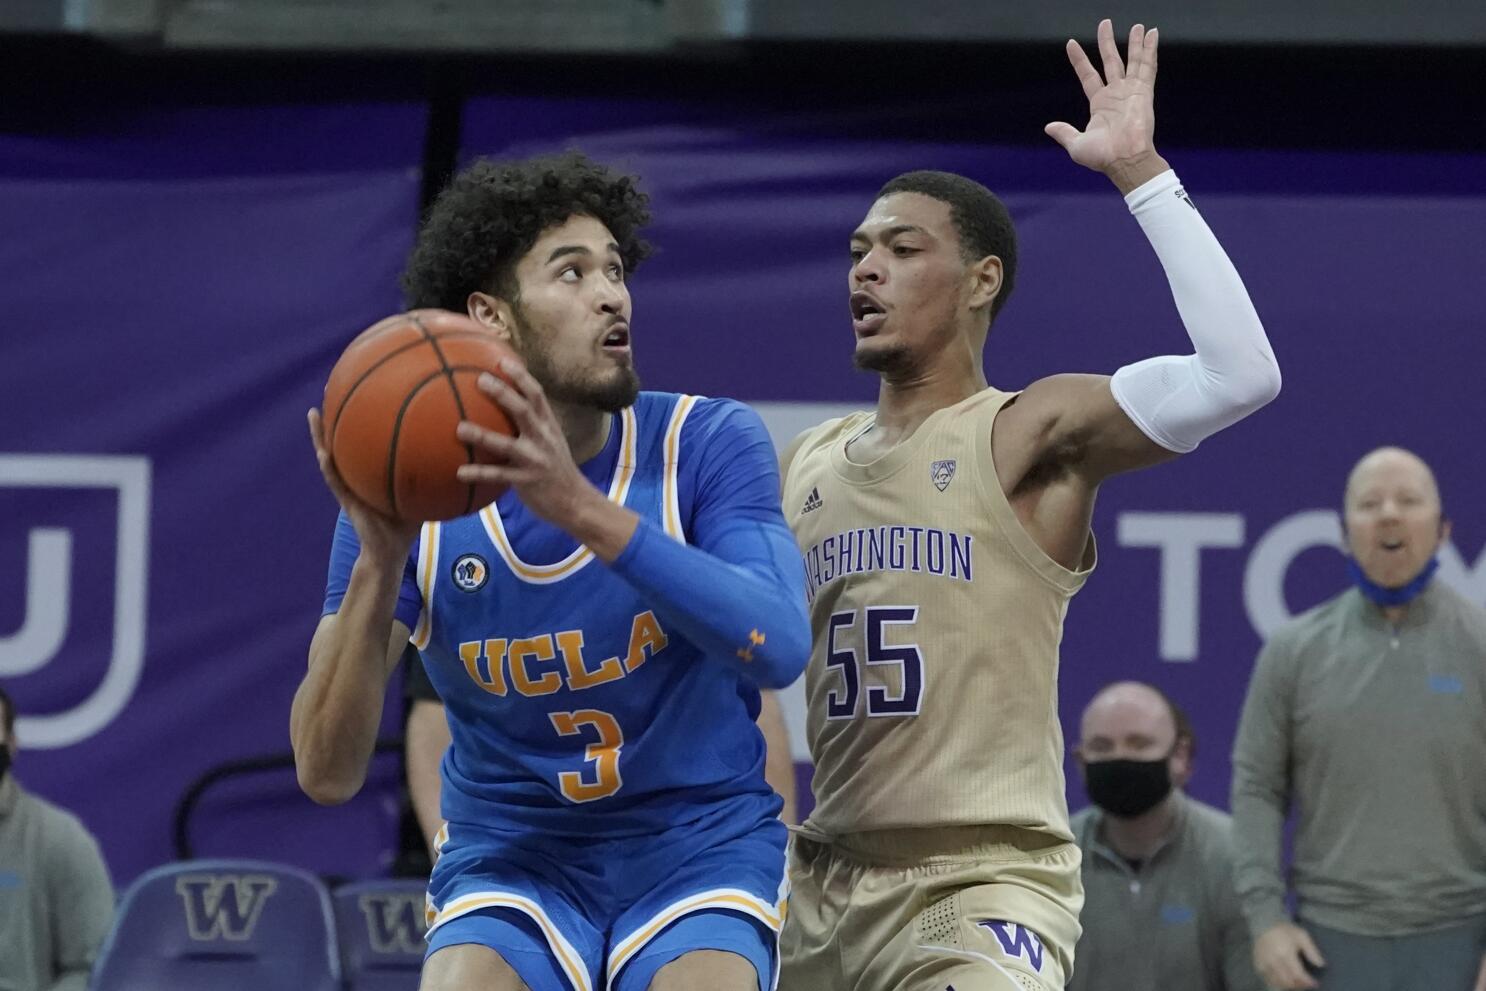 WATCH: Johnny Juzang scores career-high 32 points in UCLA 64-61